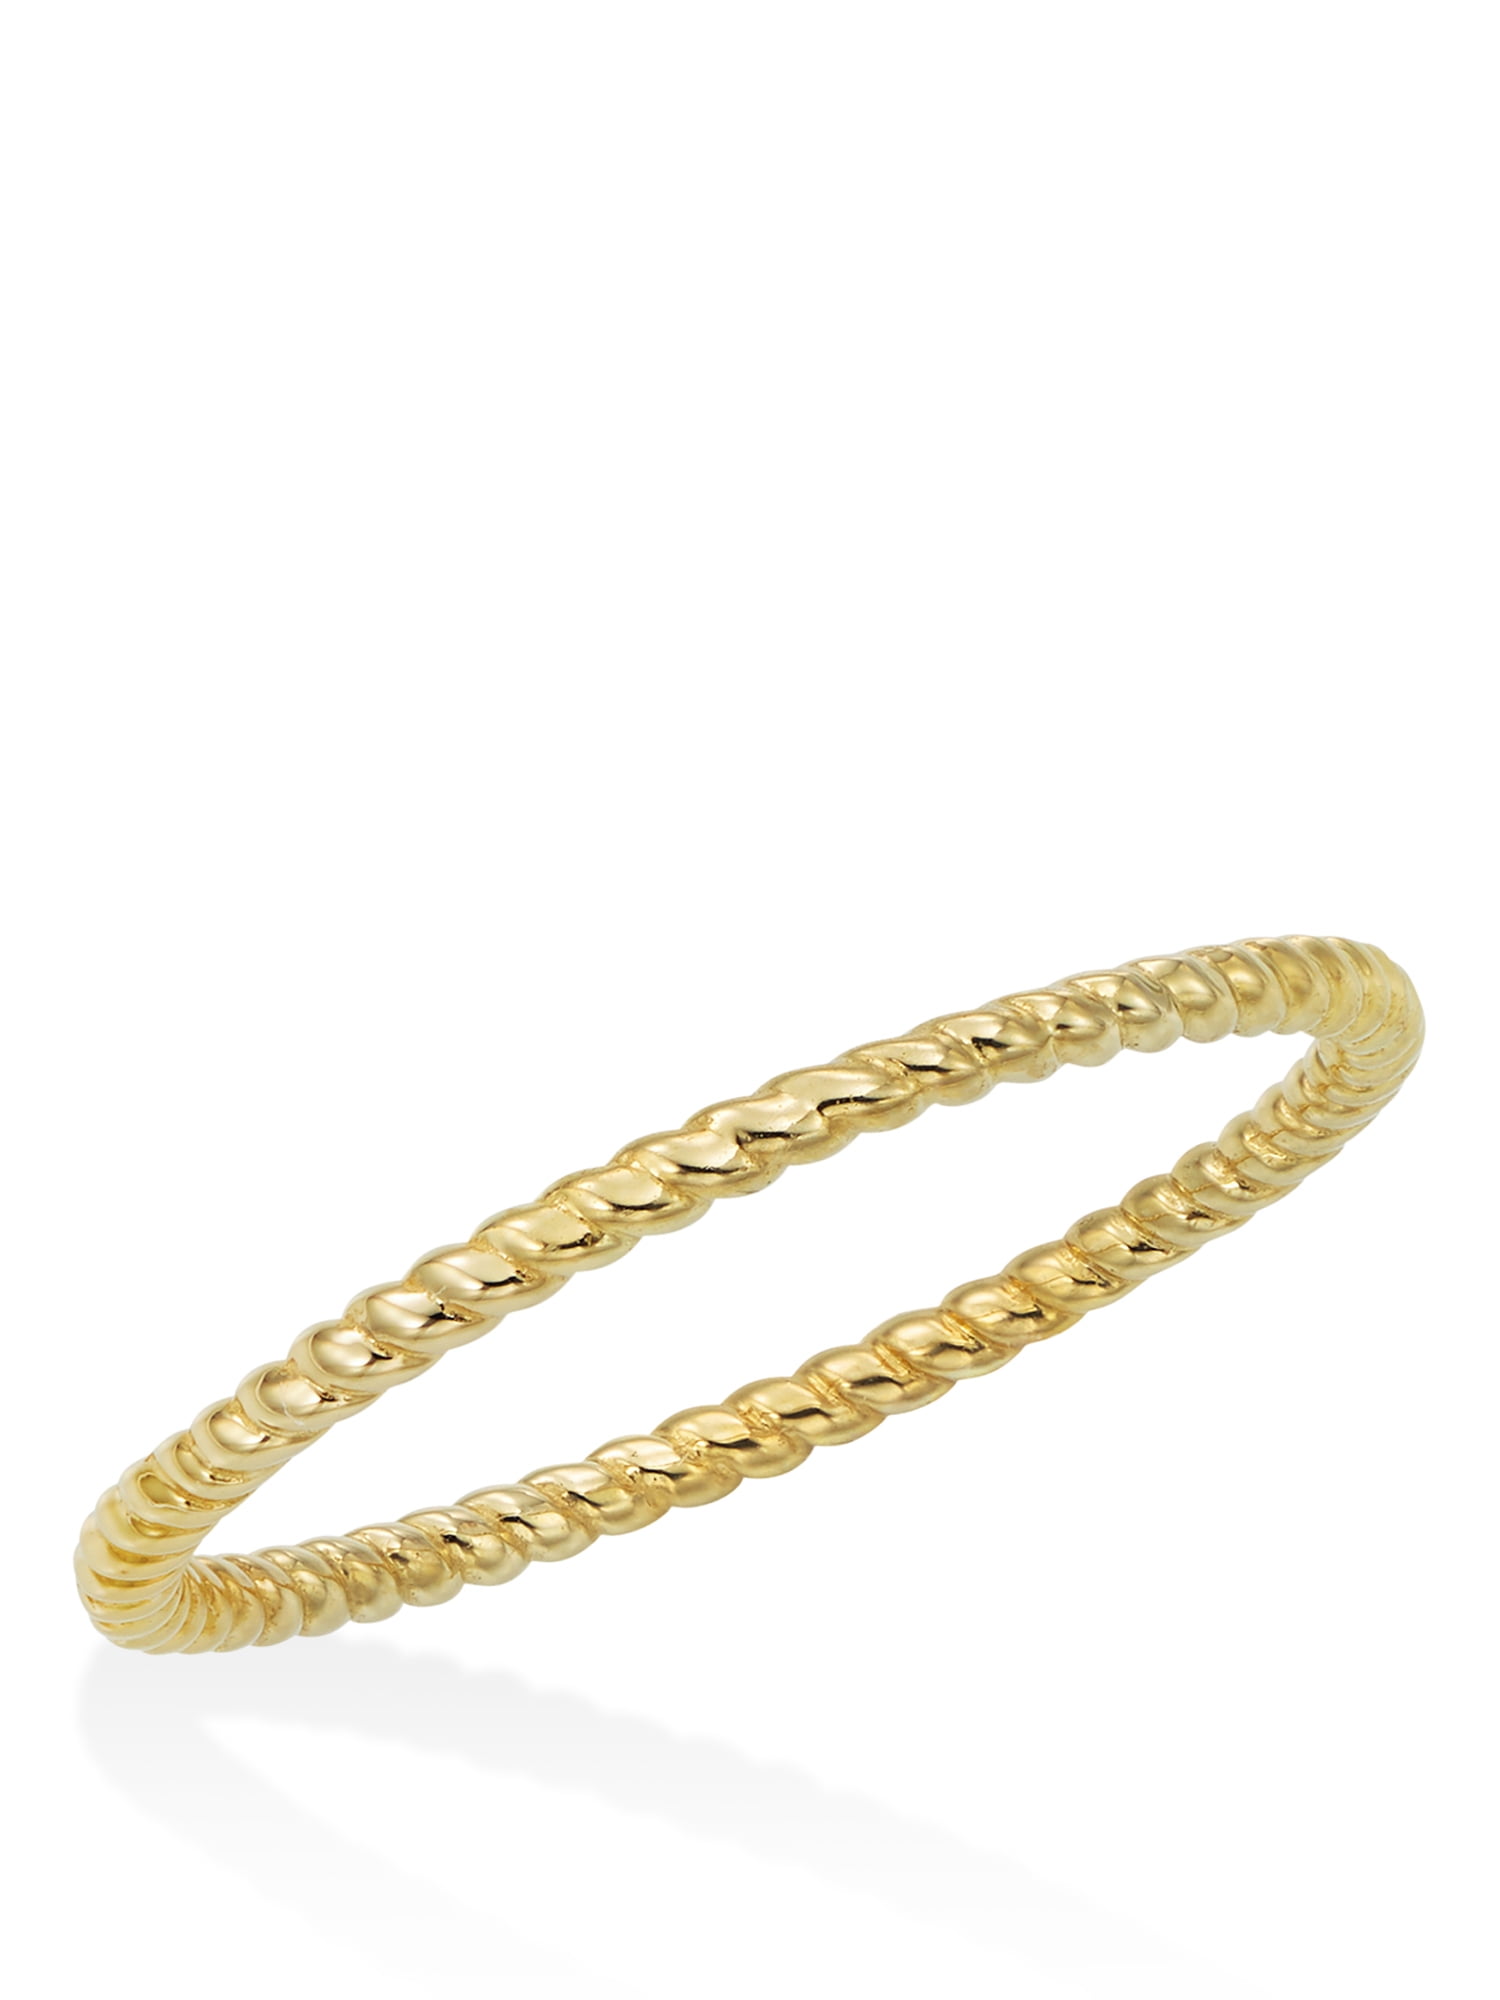 Solid 18K Yellow Gold Hammered Ring Chevron Size 1-12 Midi Faceted Stack Band